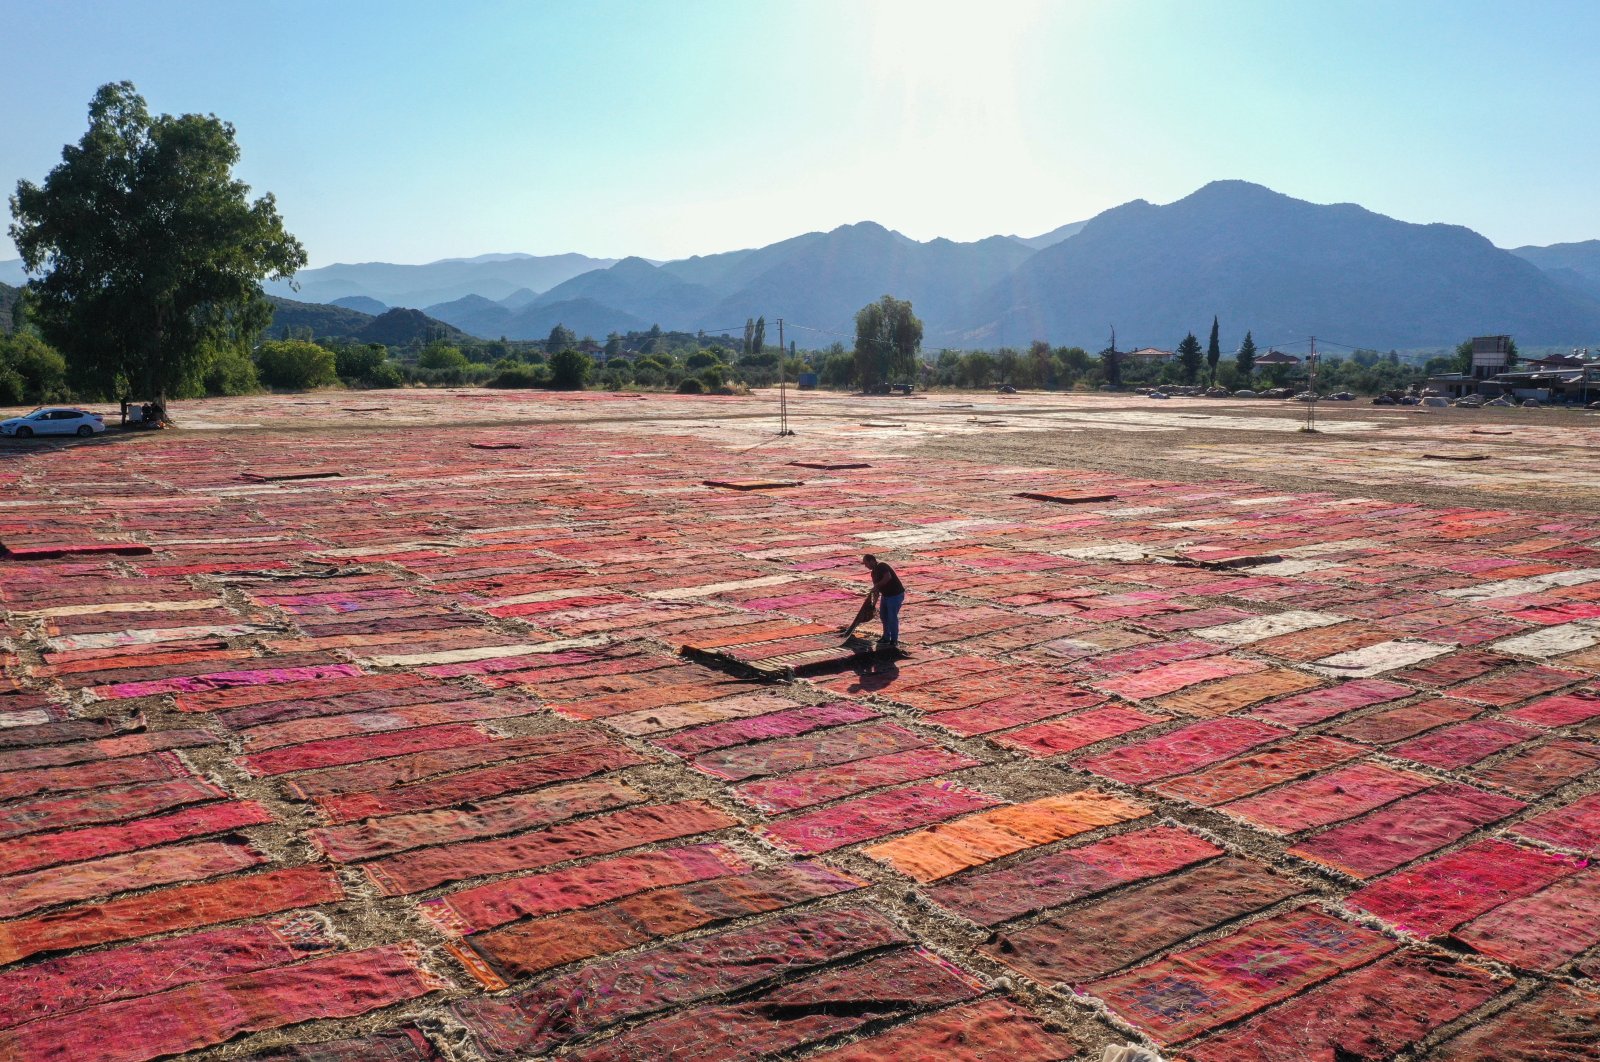 A worker attends to the carpets and rugs laid in the field, in Antalya, southern Turkey, July 31, 2022. (AA Photo)